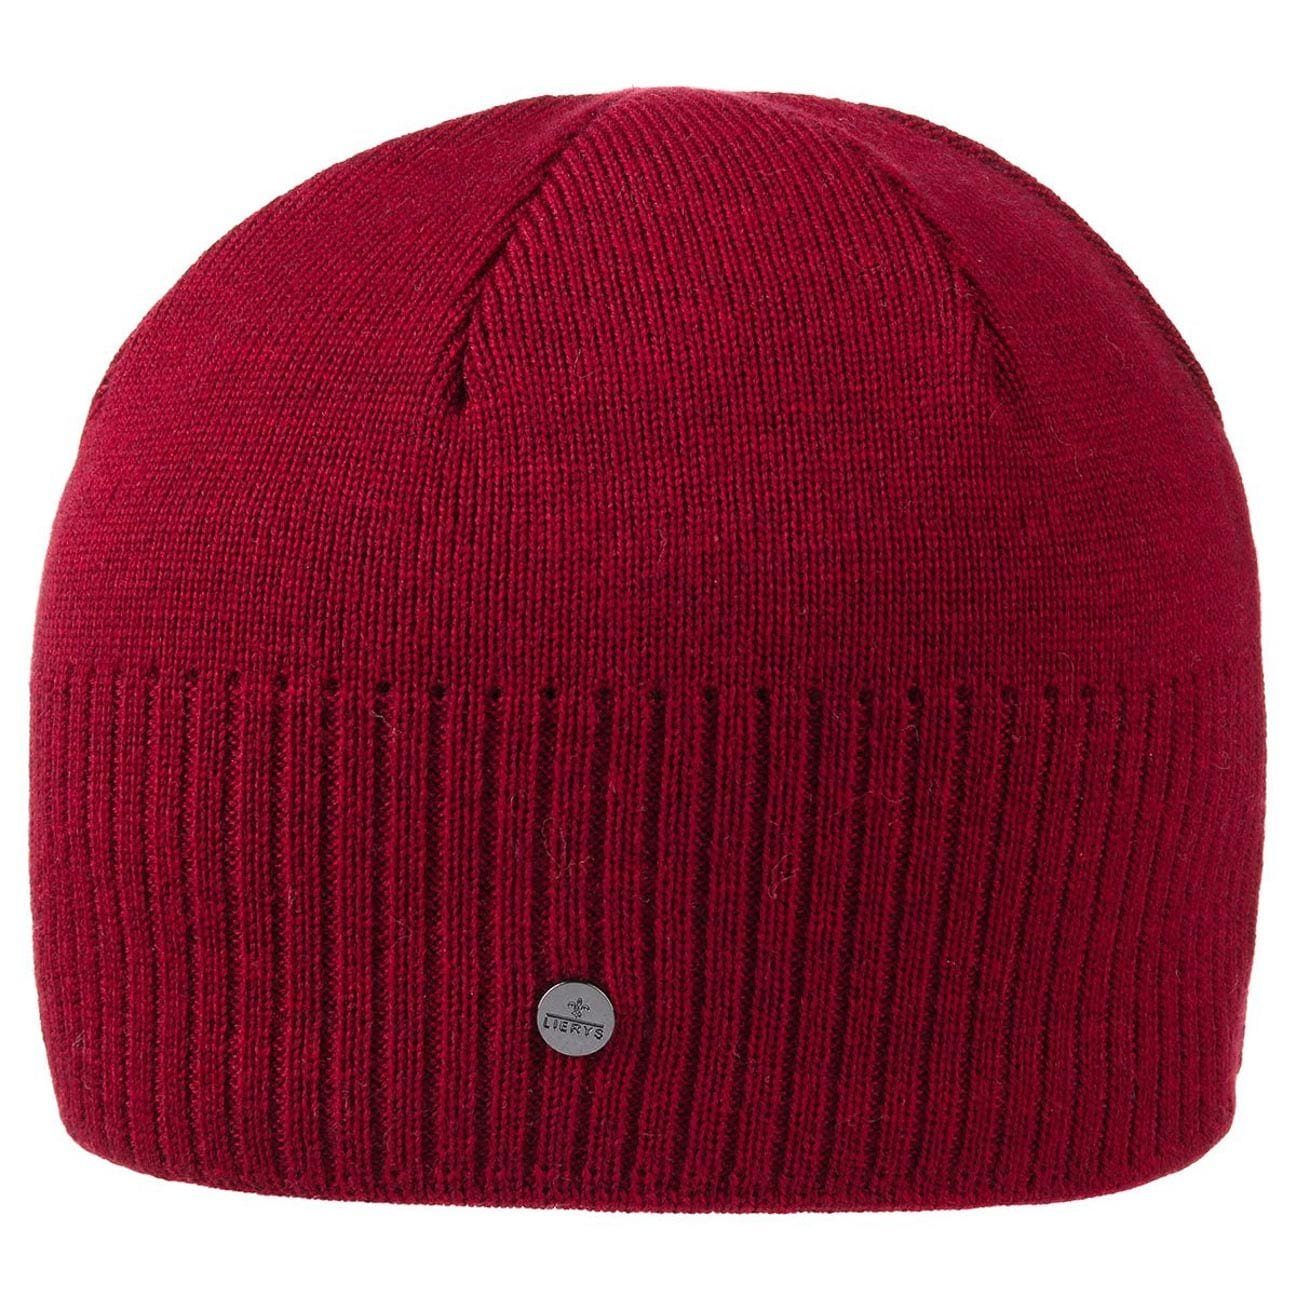 Lierys Beanie (1-St) Beanie mit Futter, Made in Germany rot